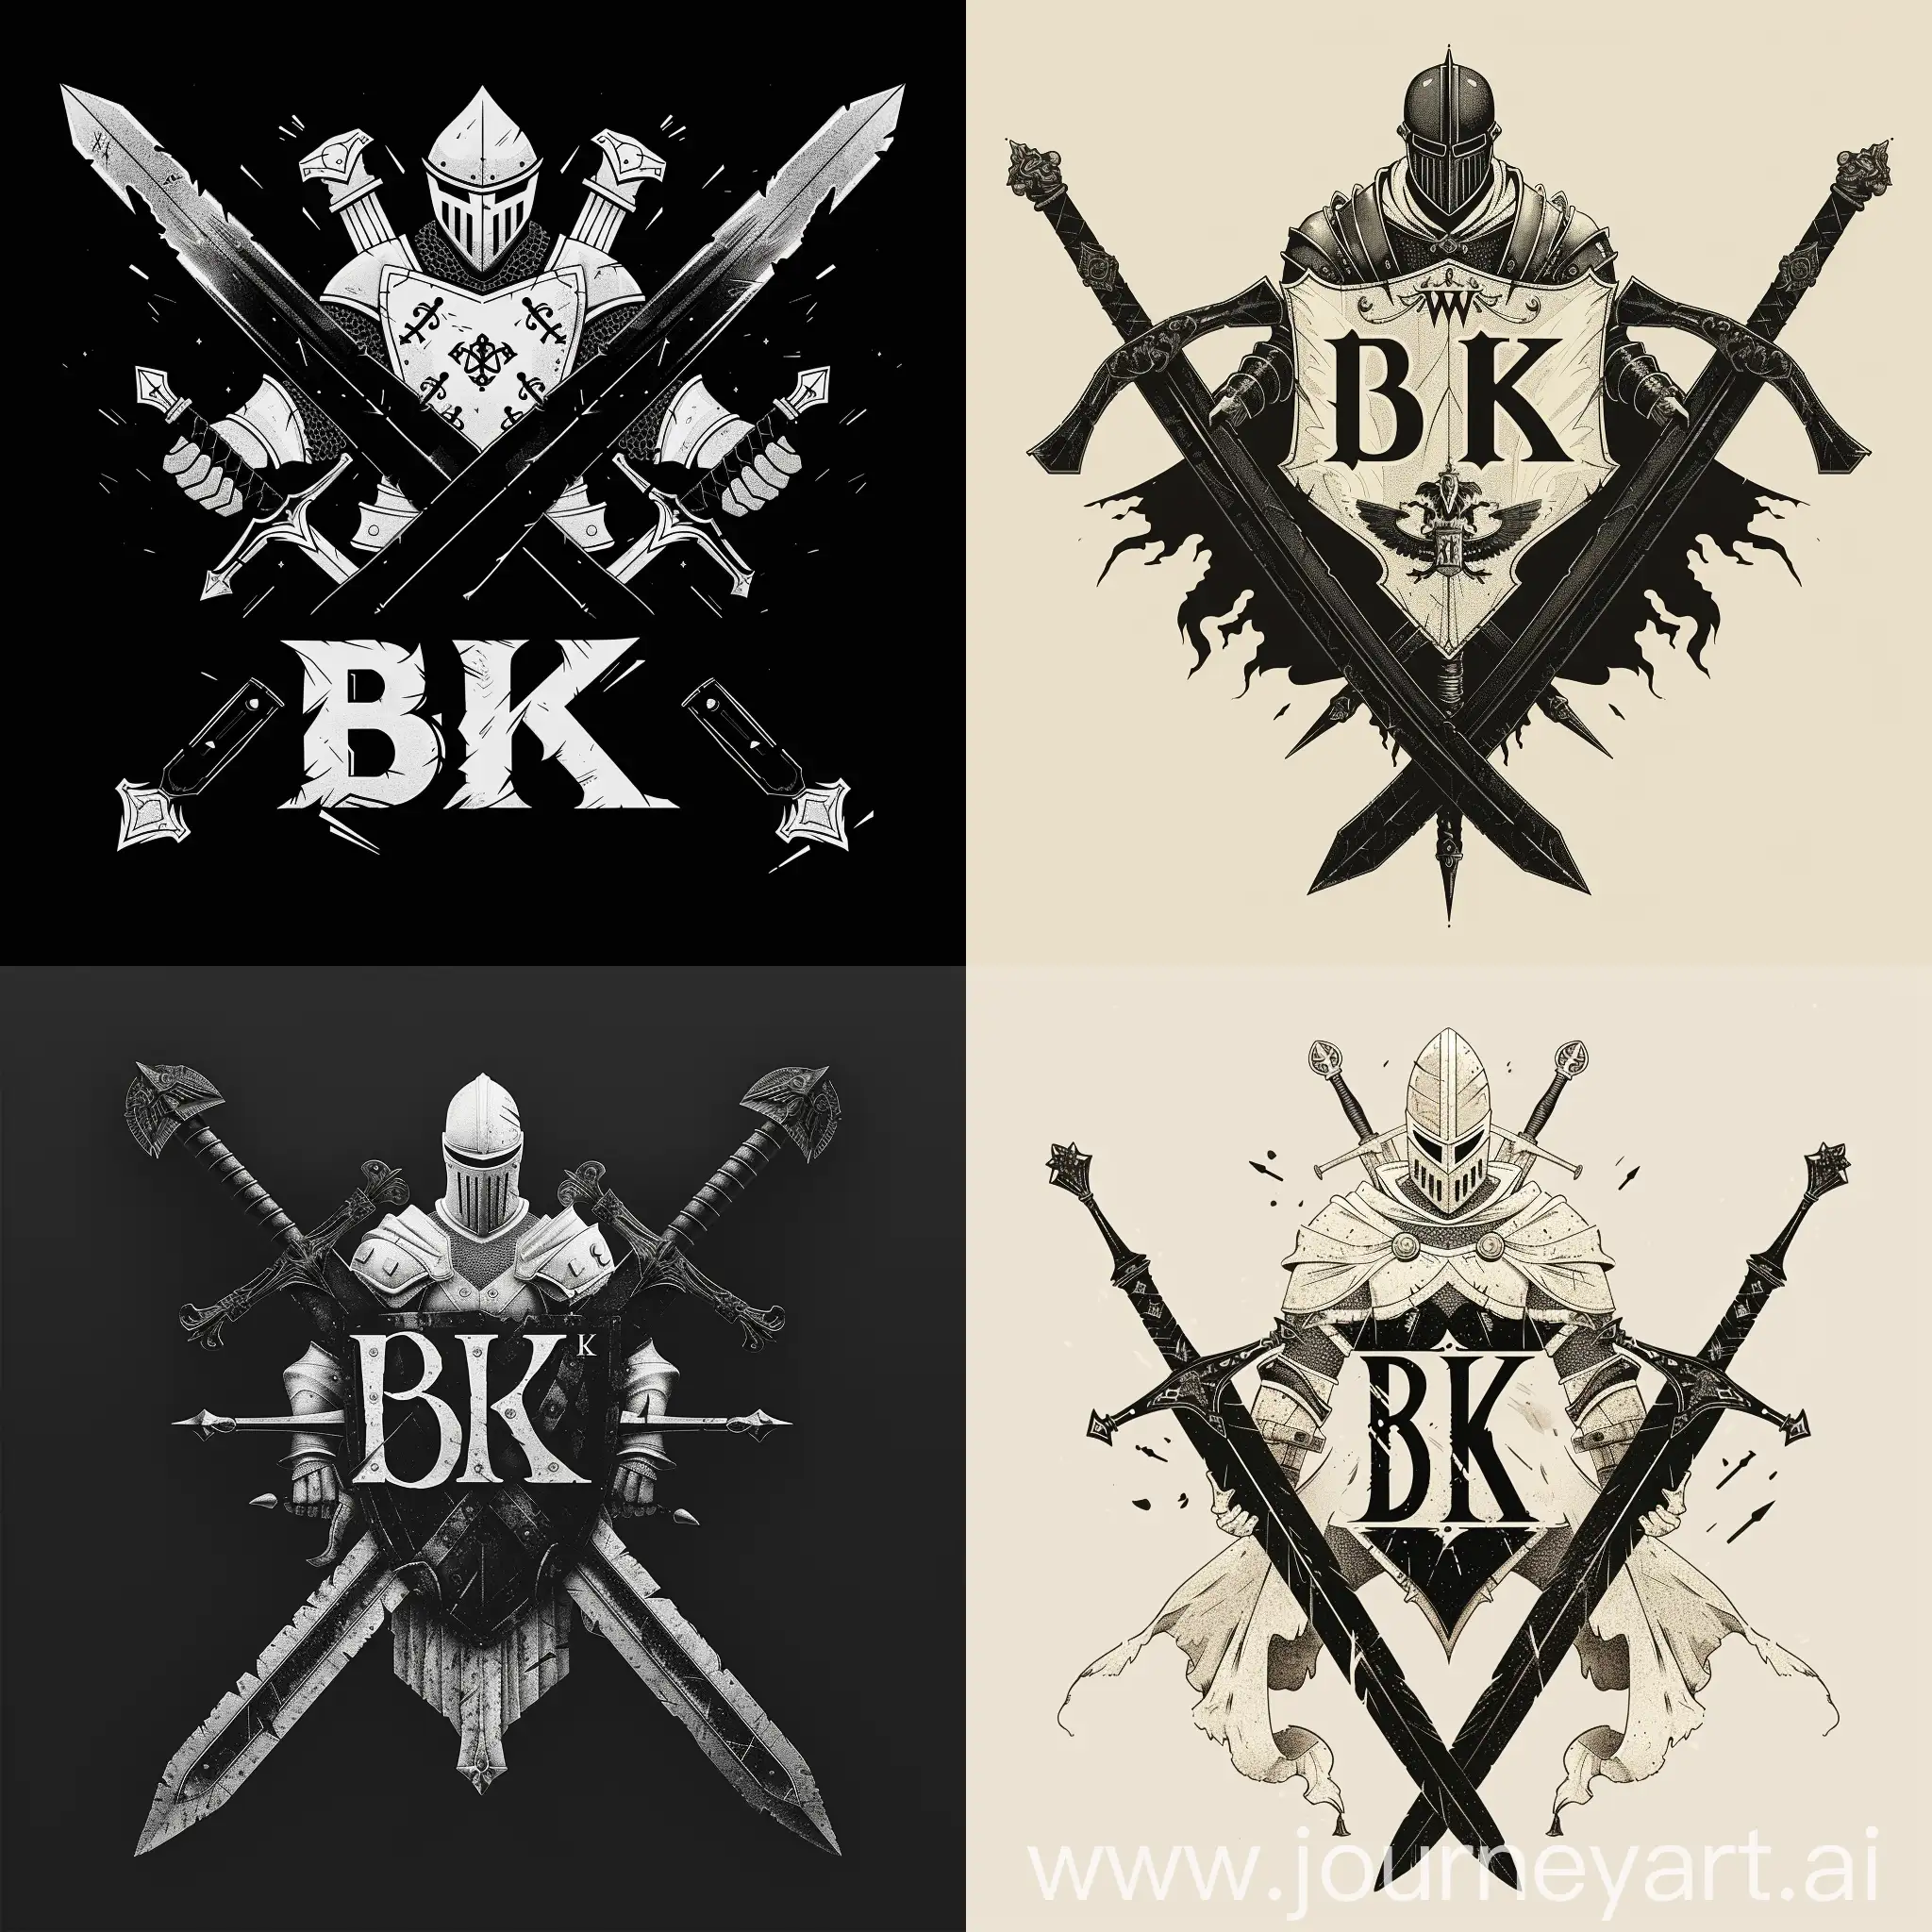 Black-Knight-Swords-Logo-Design-with-Gothic-Font